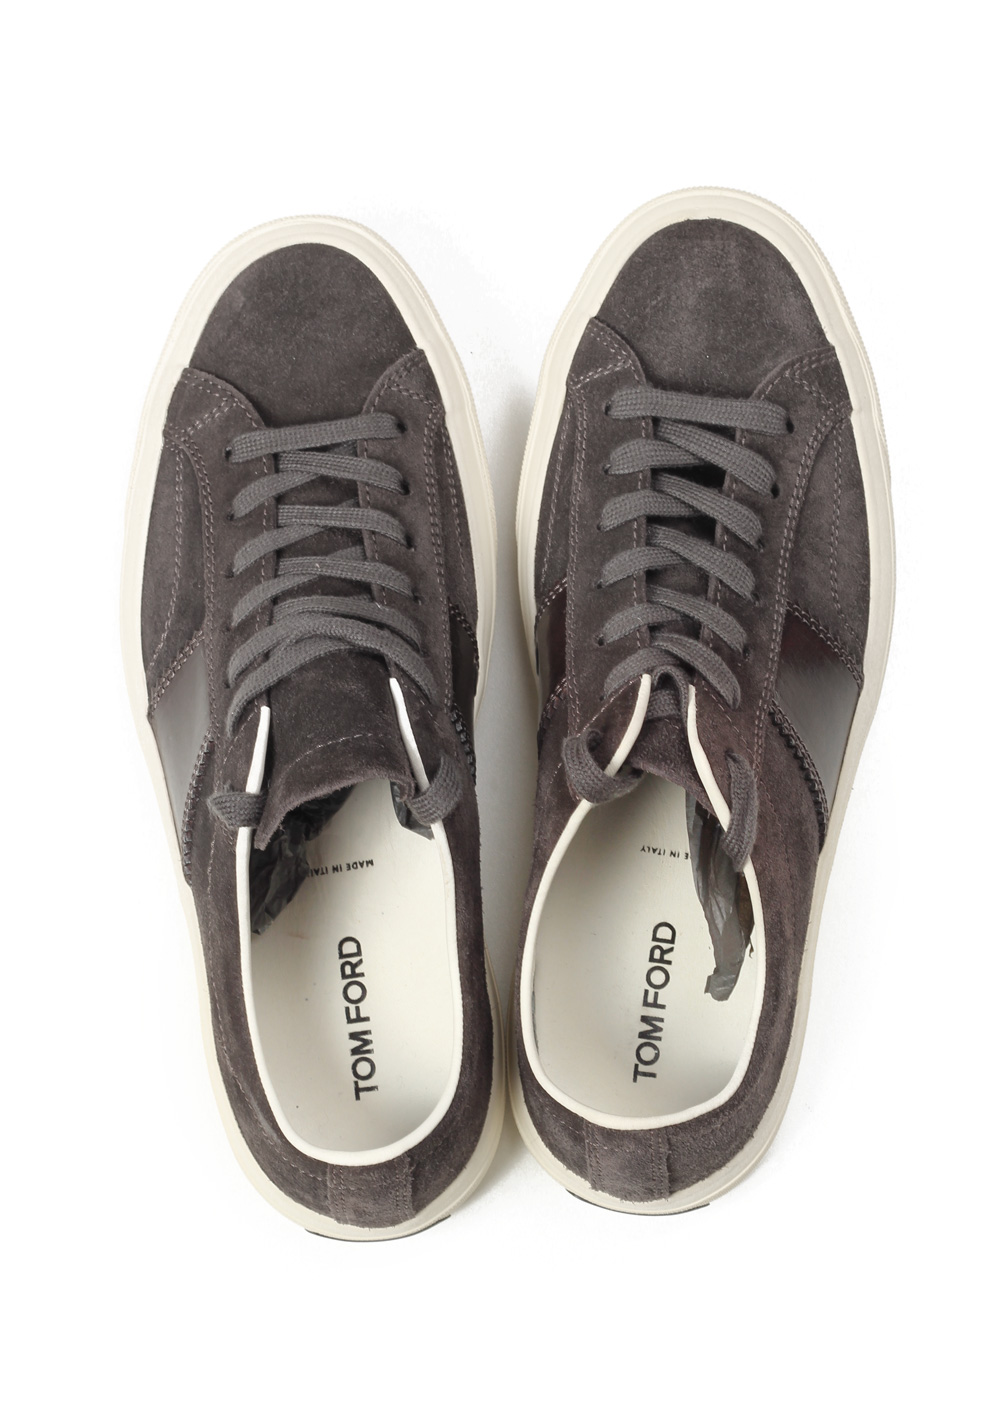 TOM FORD Cambridge Lace Up Dark Gray Suede Sneaker Shoes Size 10 UK / 11 U.S. | Costume Limité